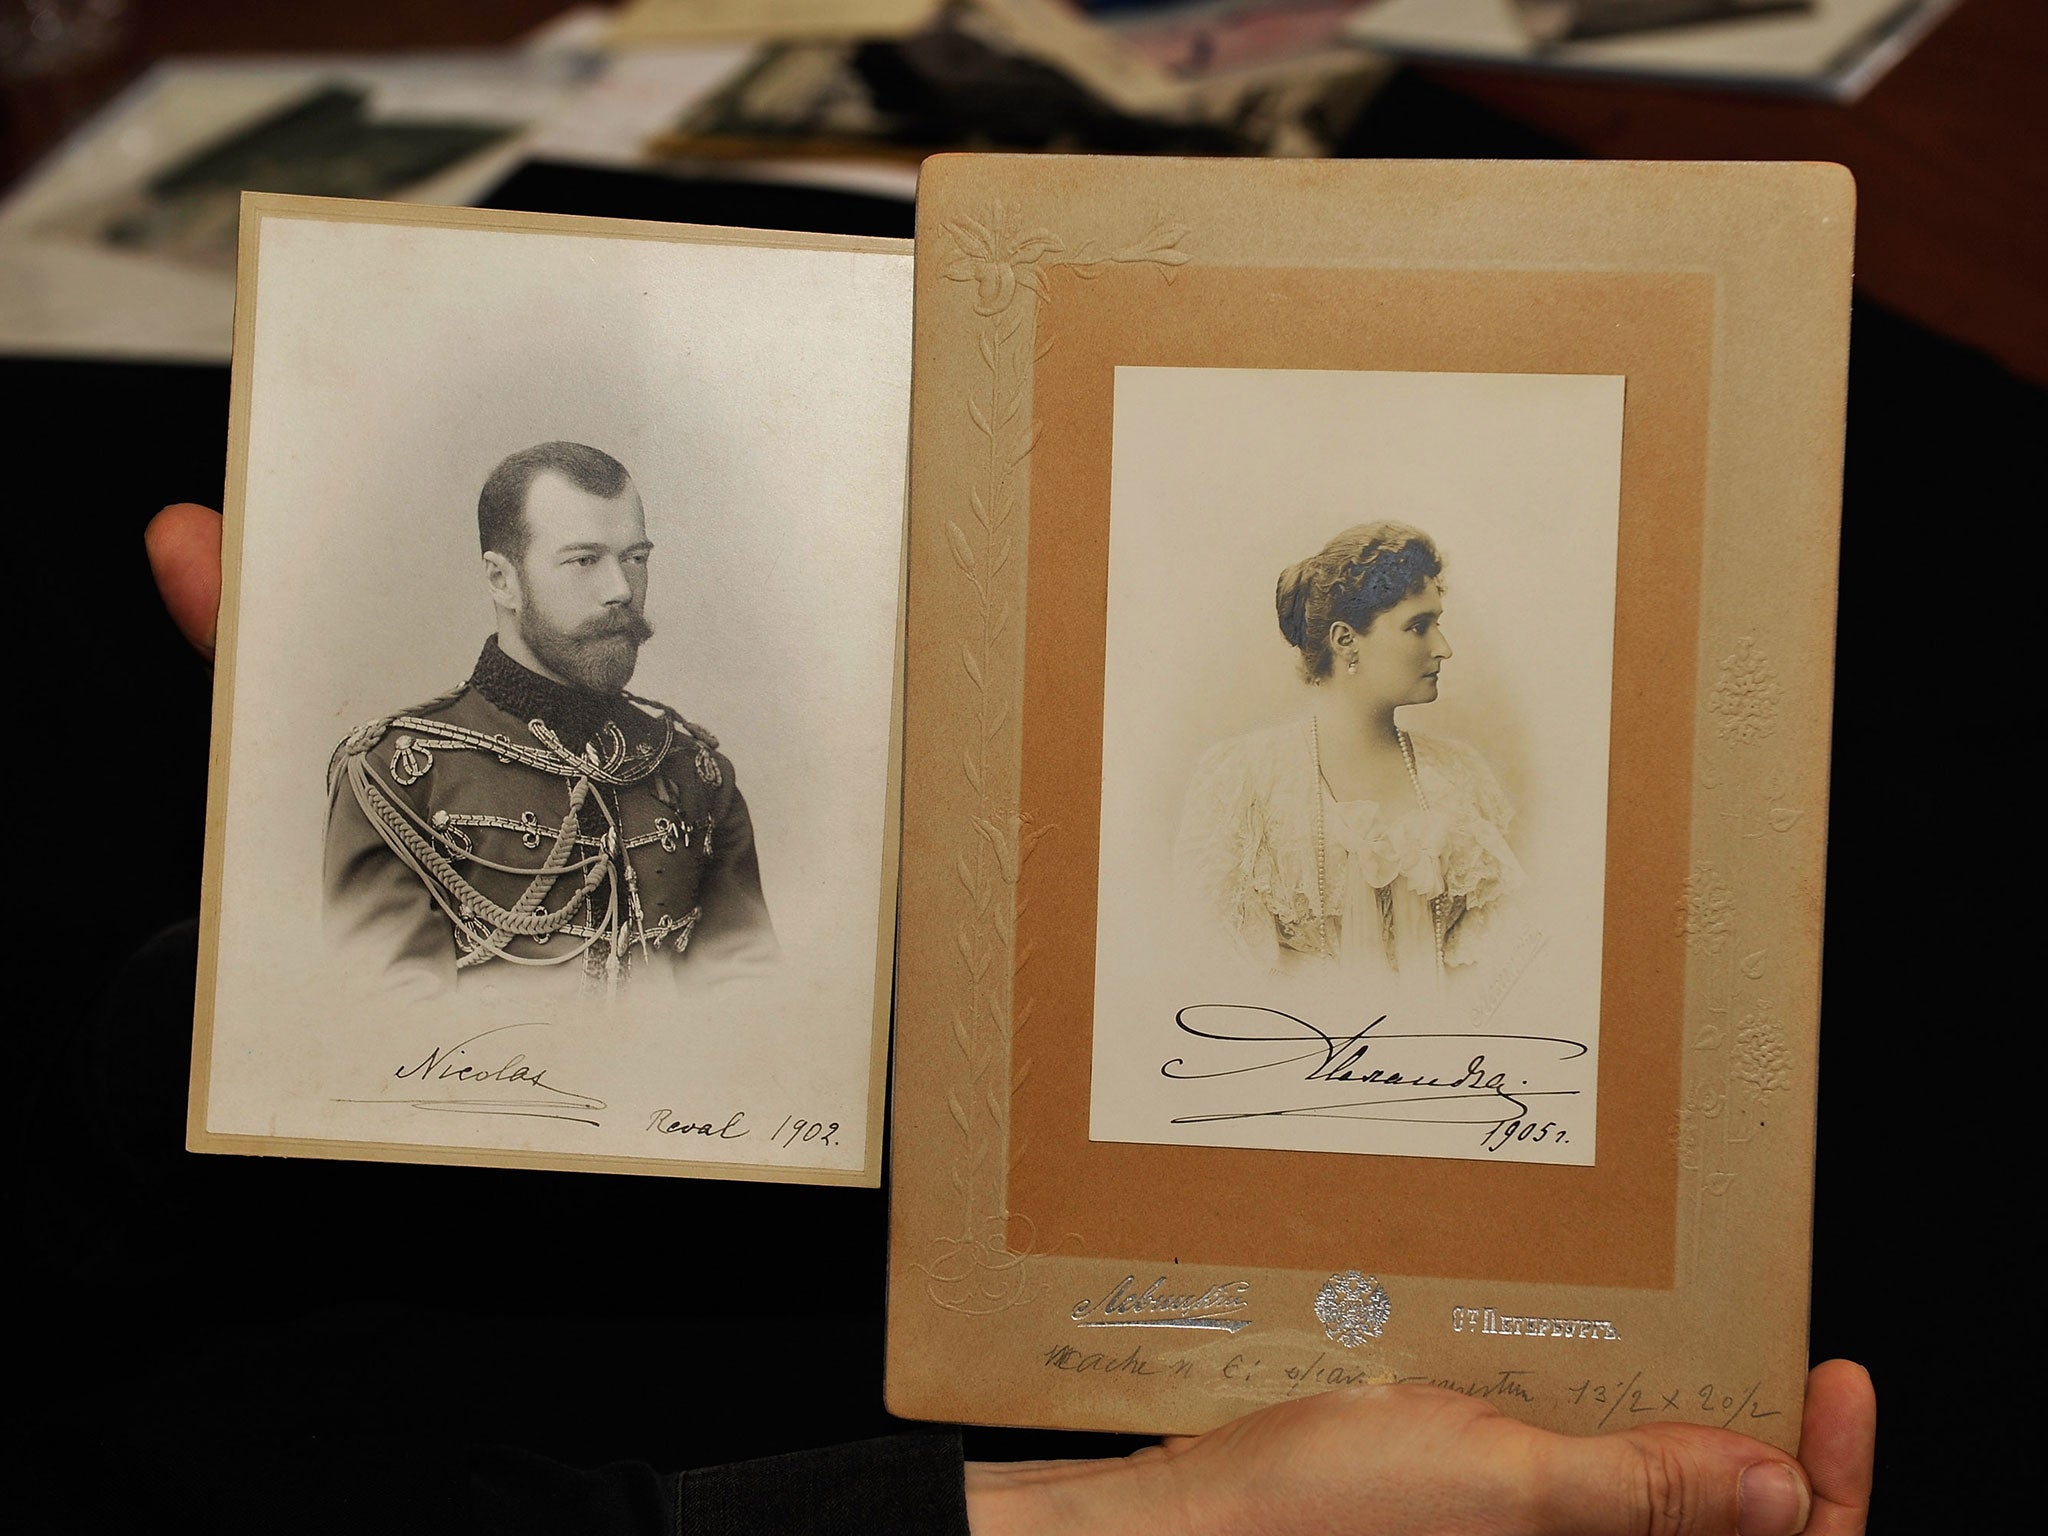 Photographs of Tsar Nicolas II and Empress Alexandra of Russia on January 16, 2013 at RR Auction in Amherst, New Hampshire